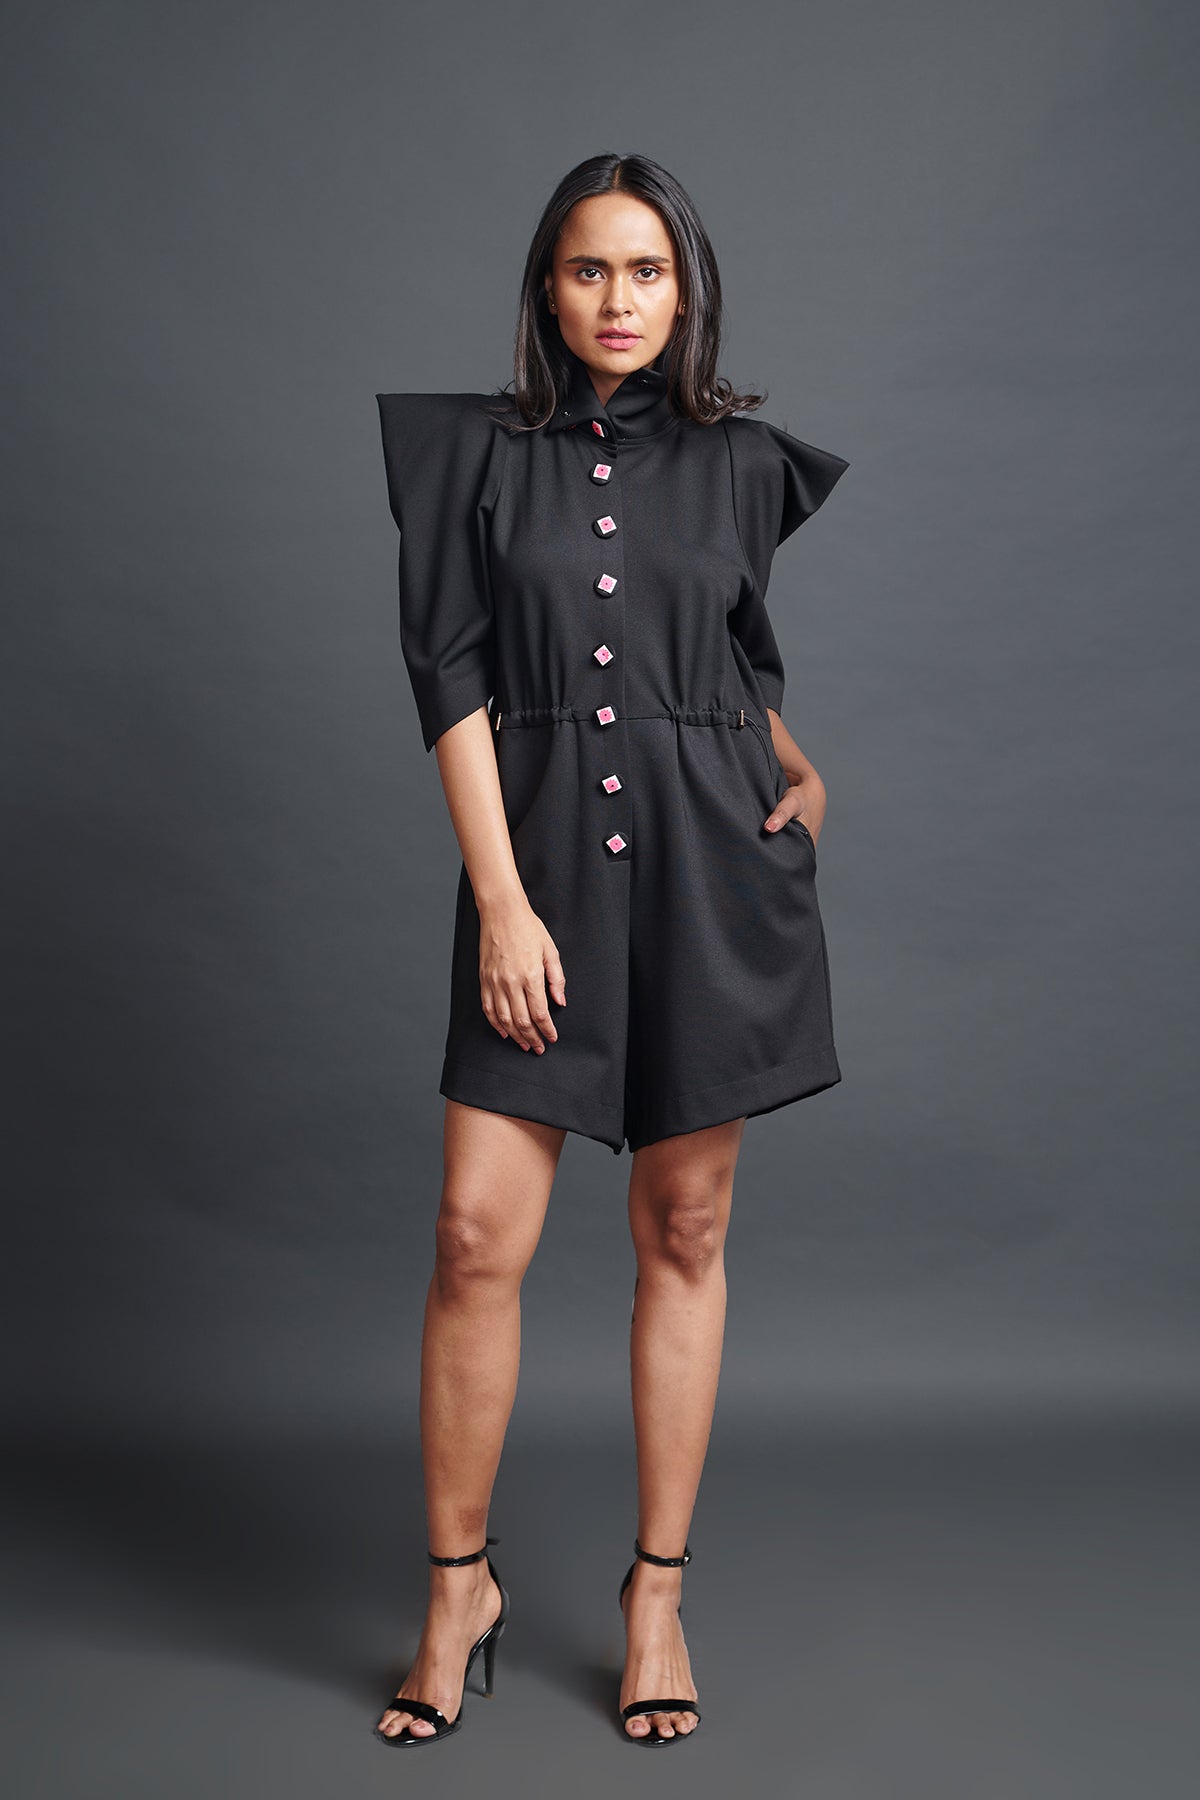 Image of BLACK HIGH NECK PLAYSUIT WITH CUT WORK NEON BUTTONS. From savoirfashions.com